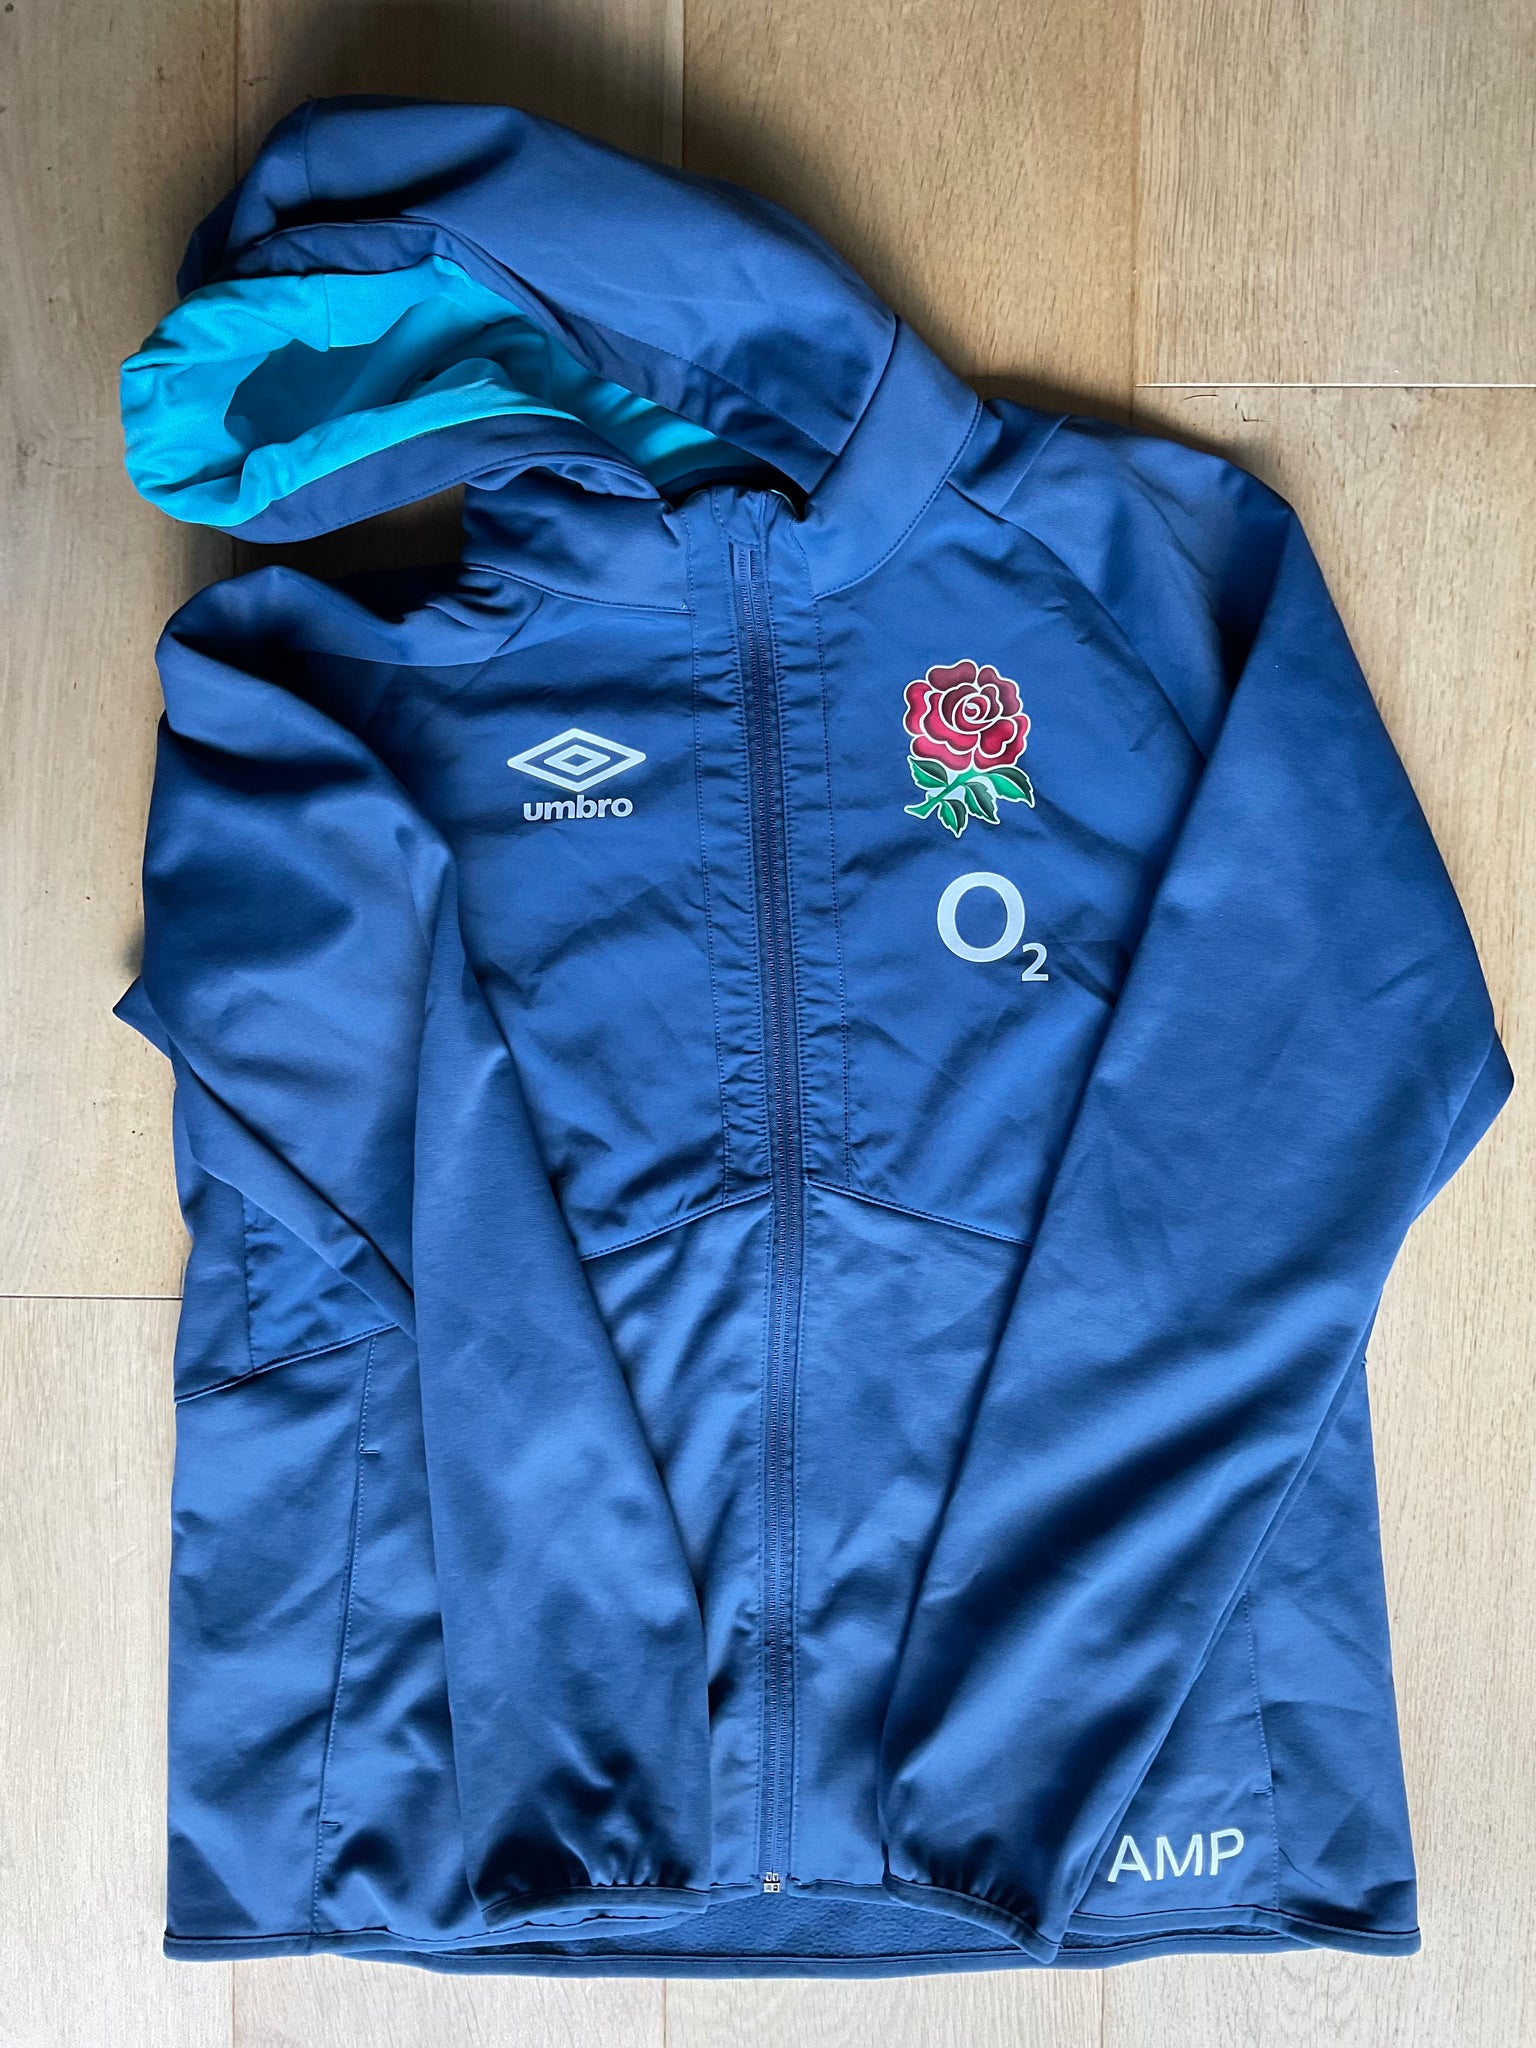 AMP Initials - England Rugby Fleece Lined Full Zip Jacket [Teal]